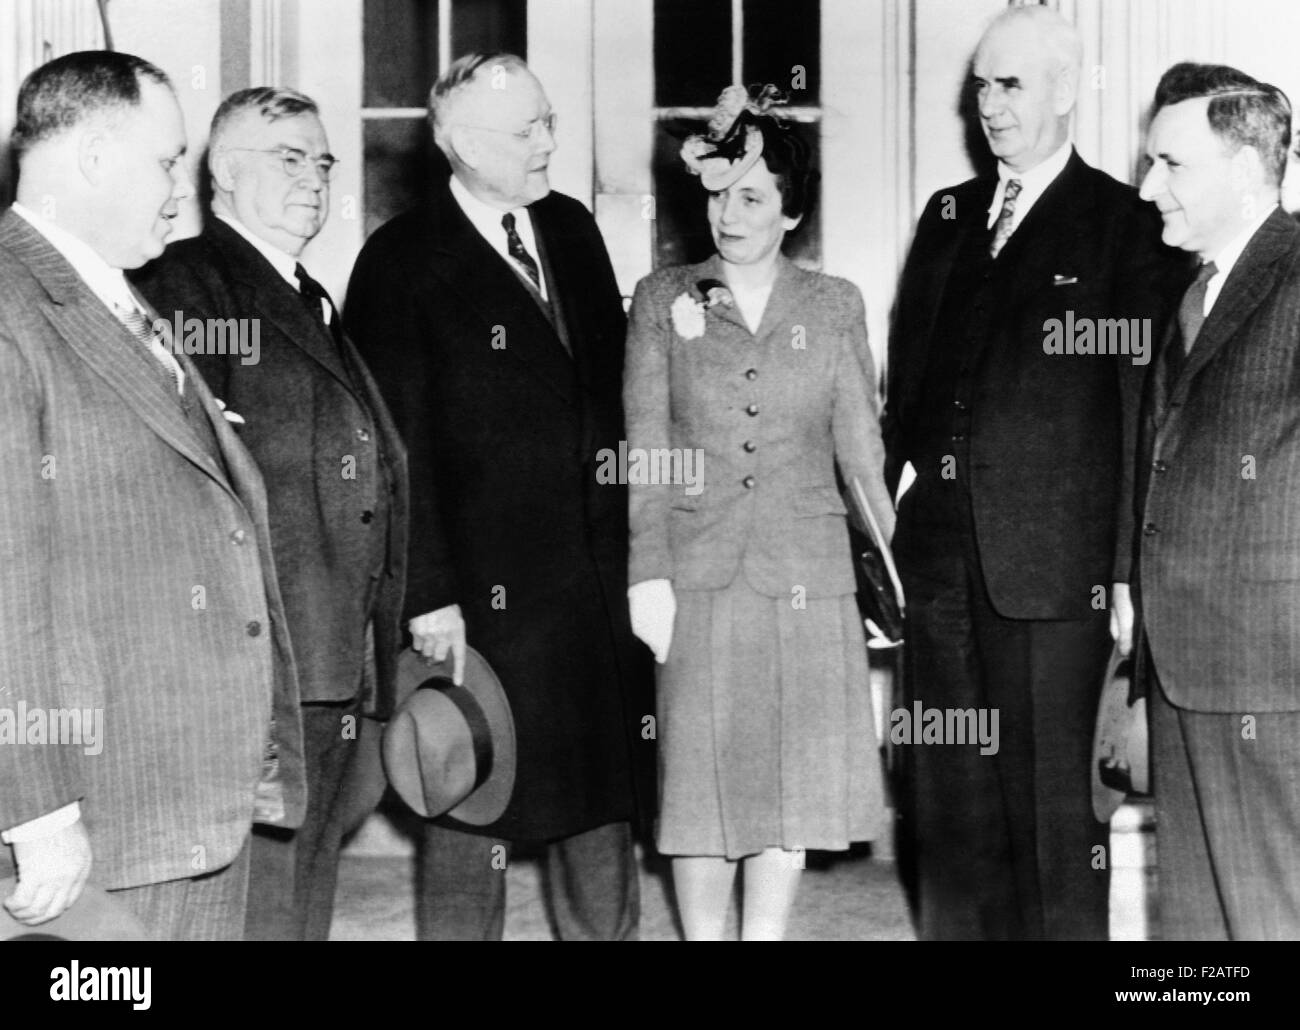 National War Labor Board at the White House met with President Franklin Roosevelt. April 1, 1943. The board arbitrated labor disputes to maintain wartime industrial productivity. L-R: George Meany; Al Johnson; William Green; Anna Rosenberg; Philip Murray, and Julius Emspak. (CSU 2015 11 1657) Stock Photo